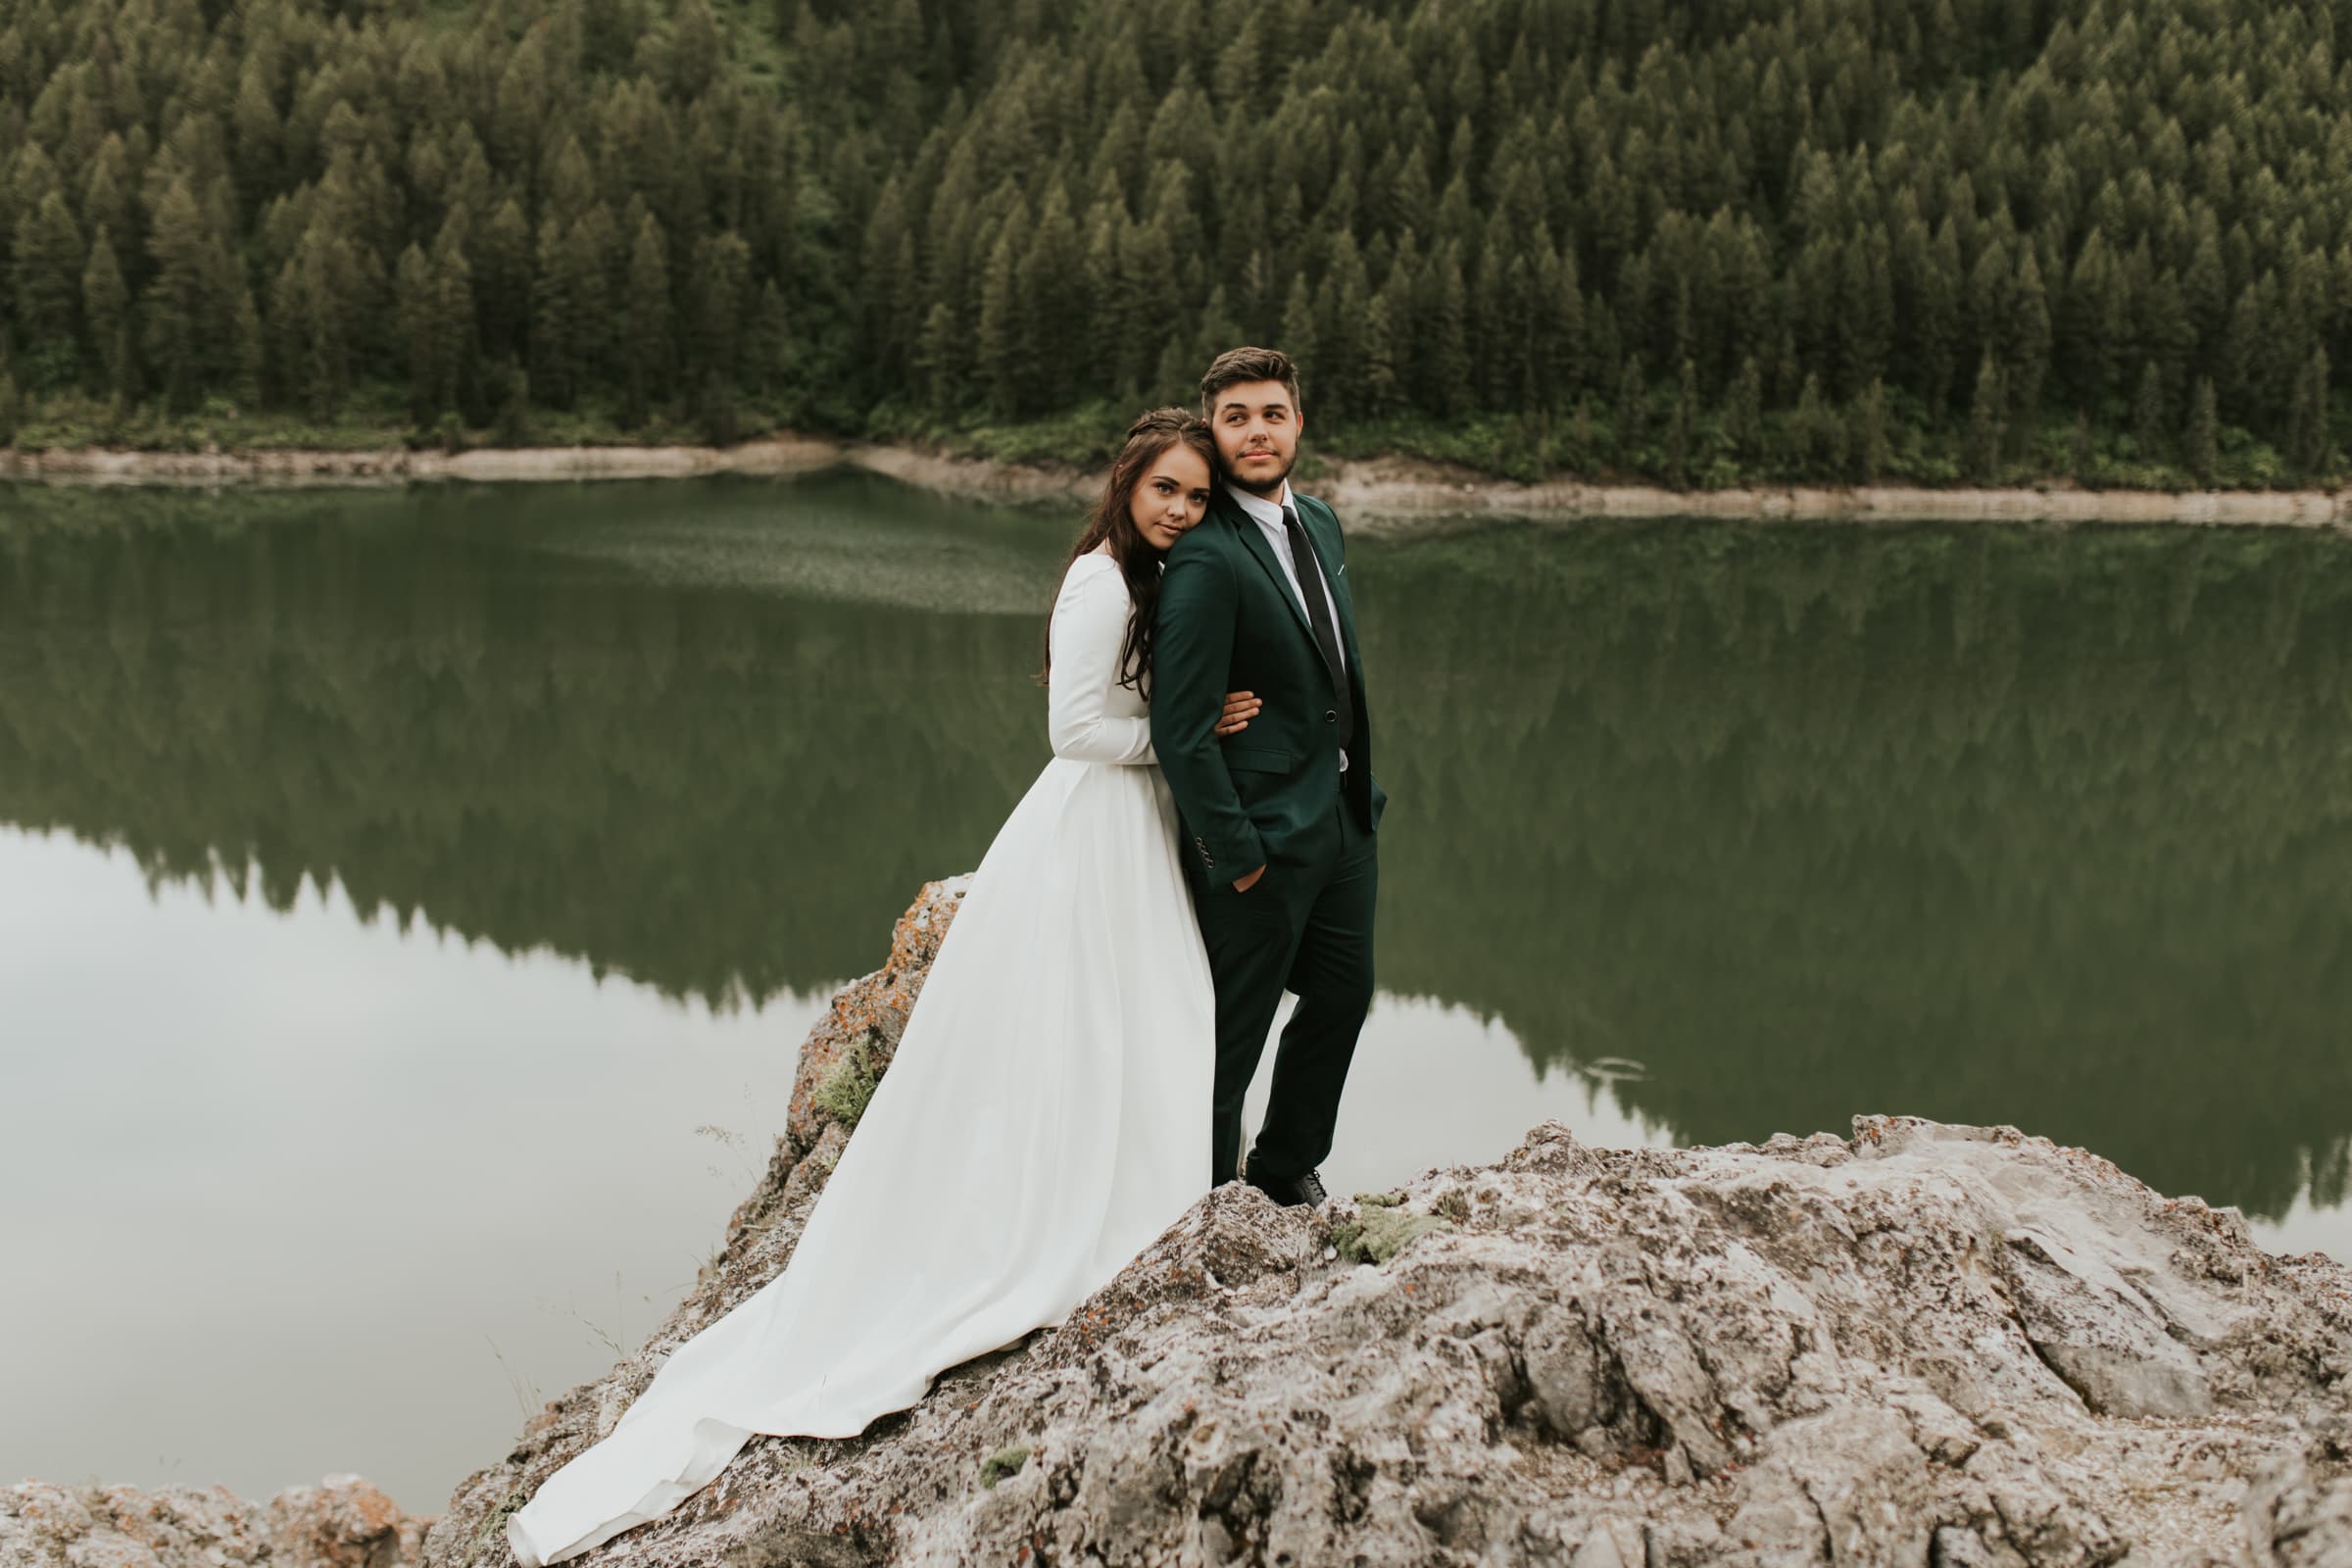 A bride and groom hugging by Palisades Reservoir in Irwin, Idaho on their wedding day.